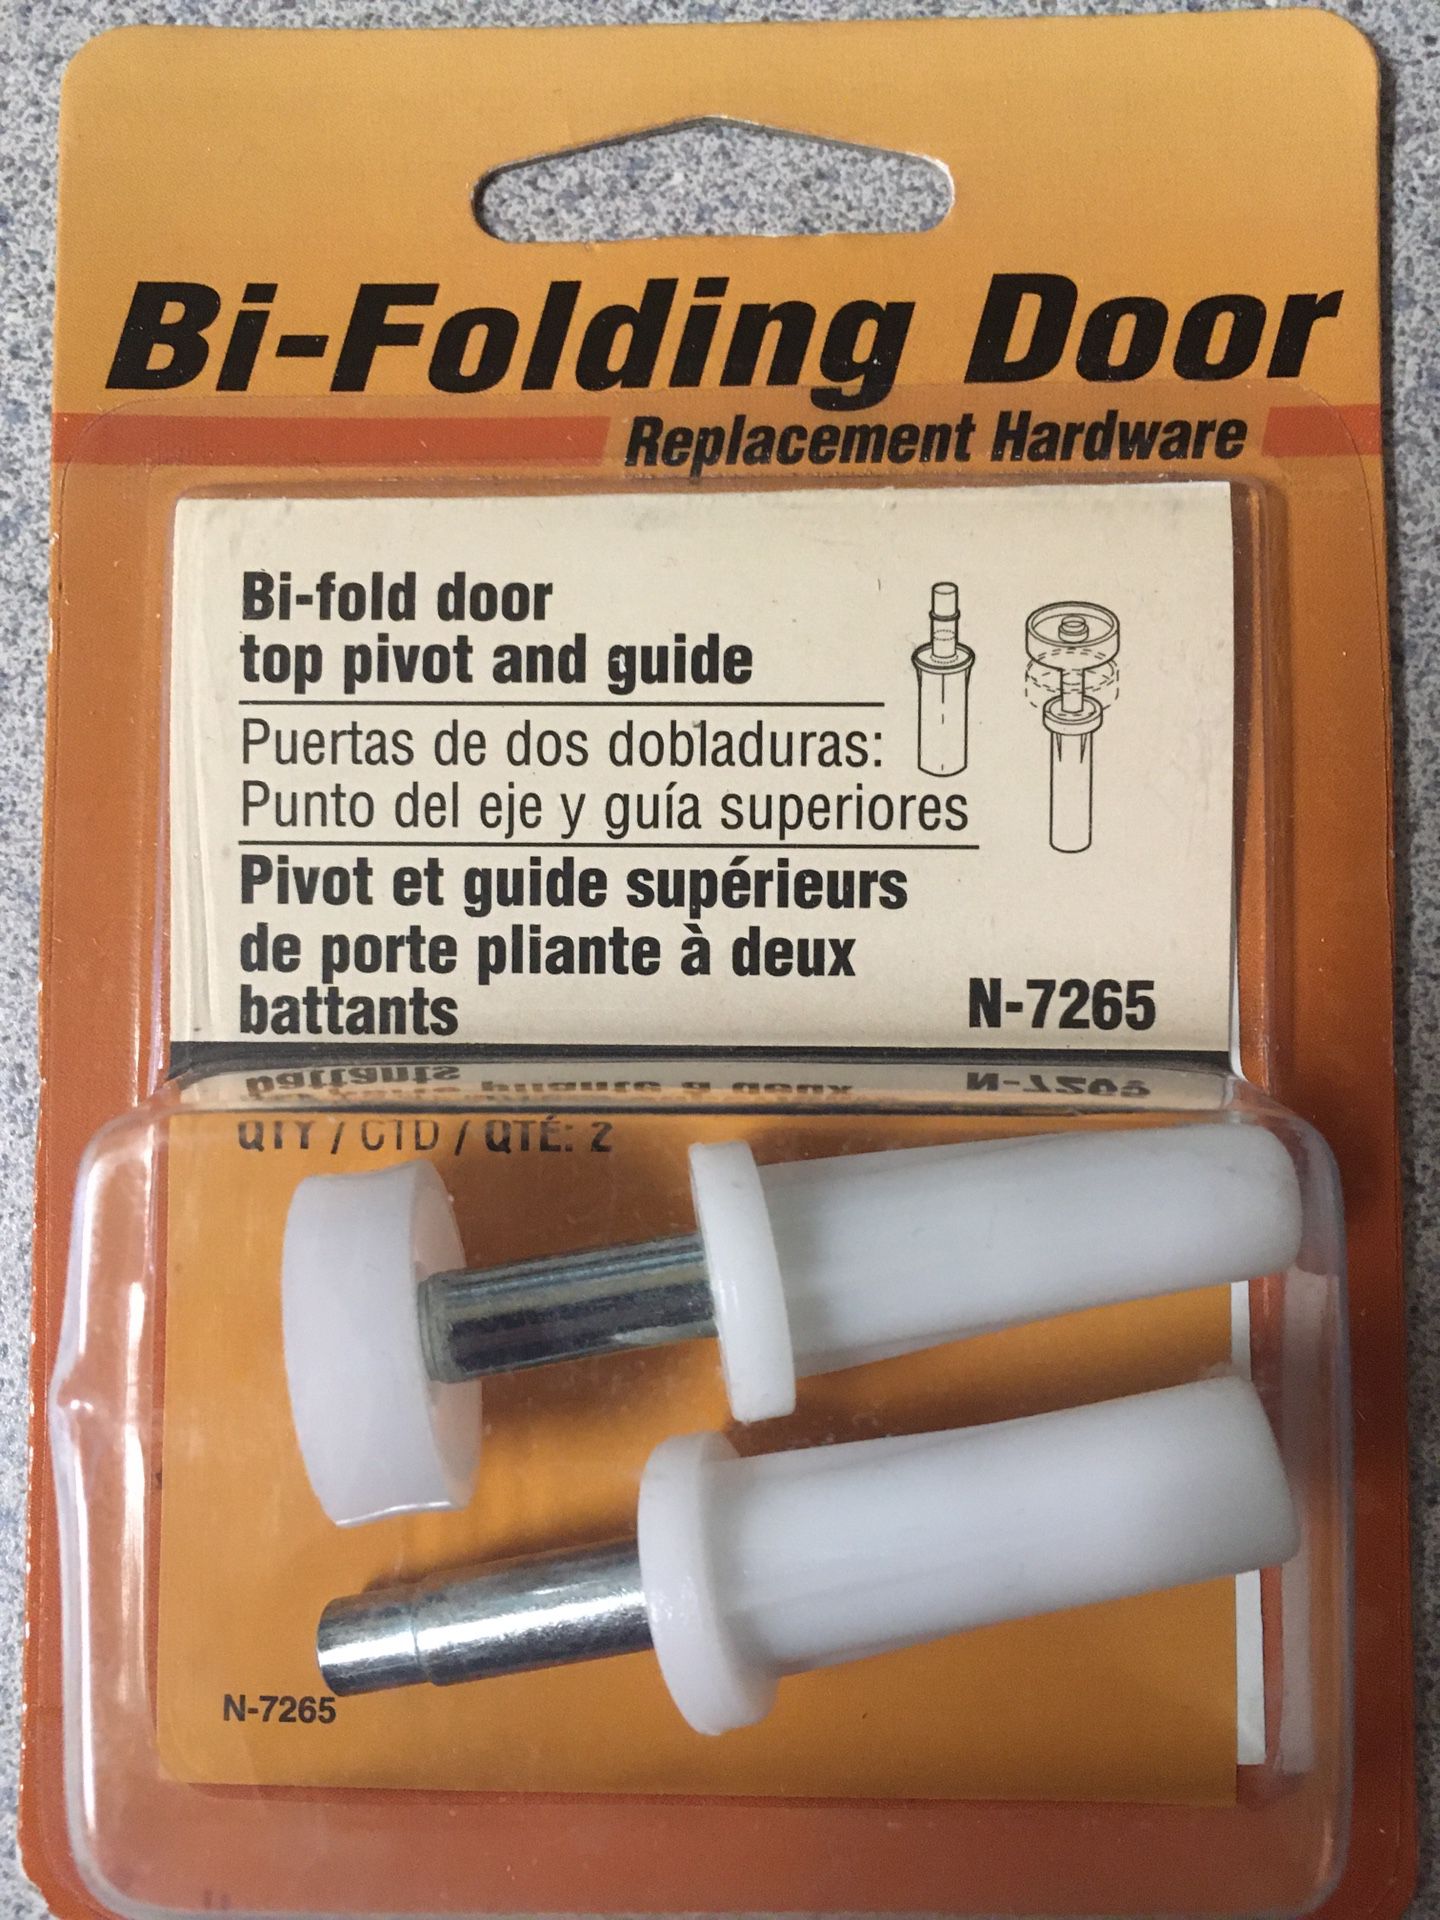 No-Folding Door Top Pivot and Guide